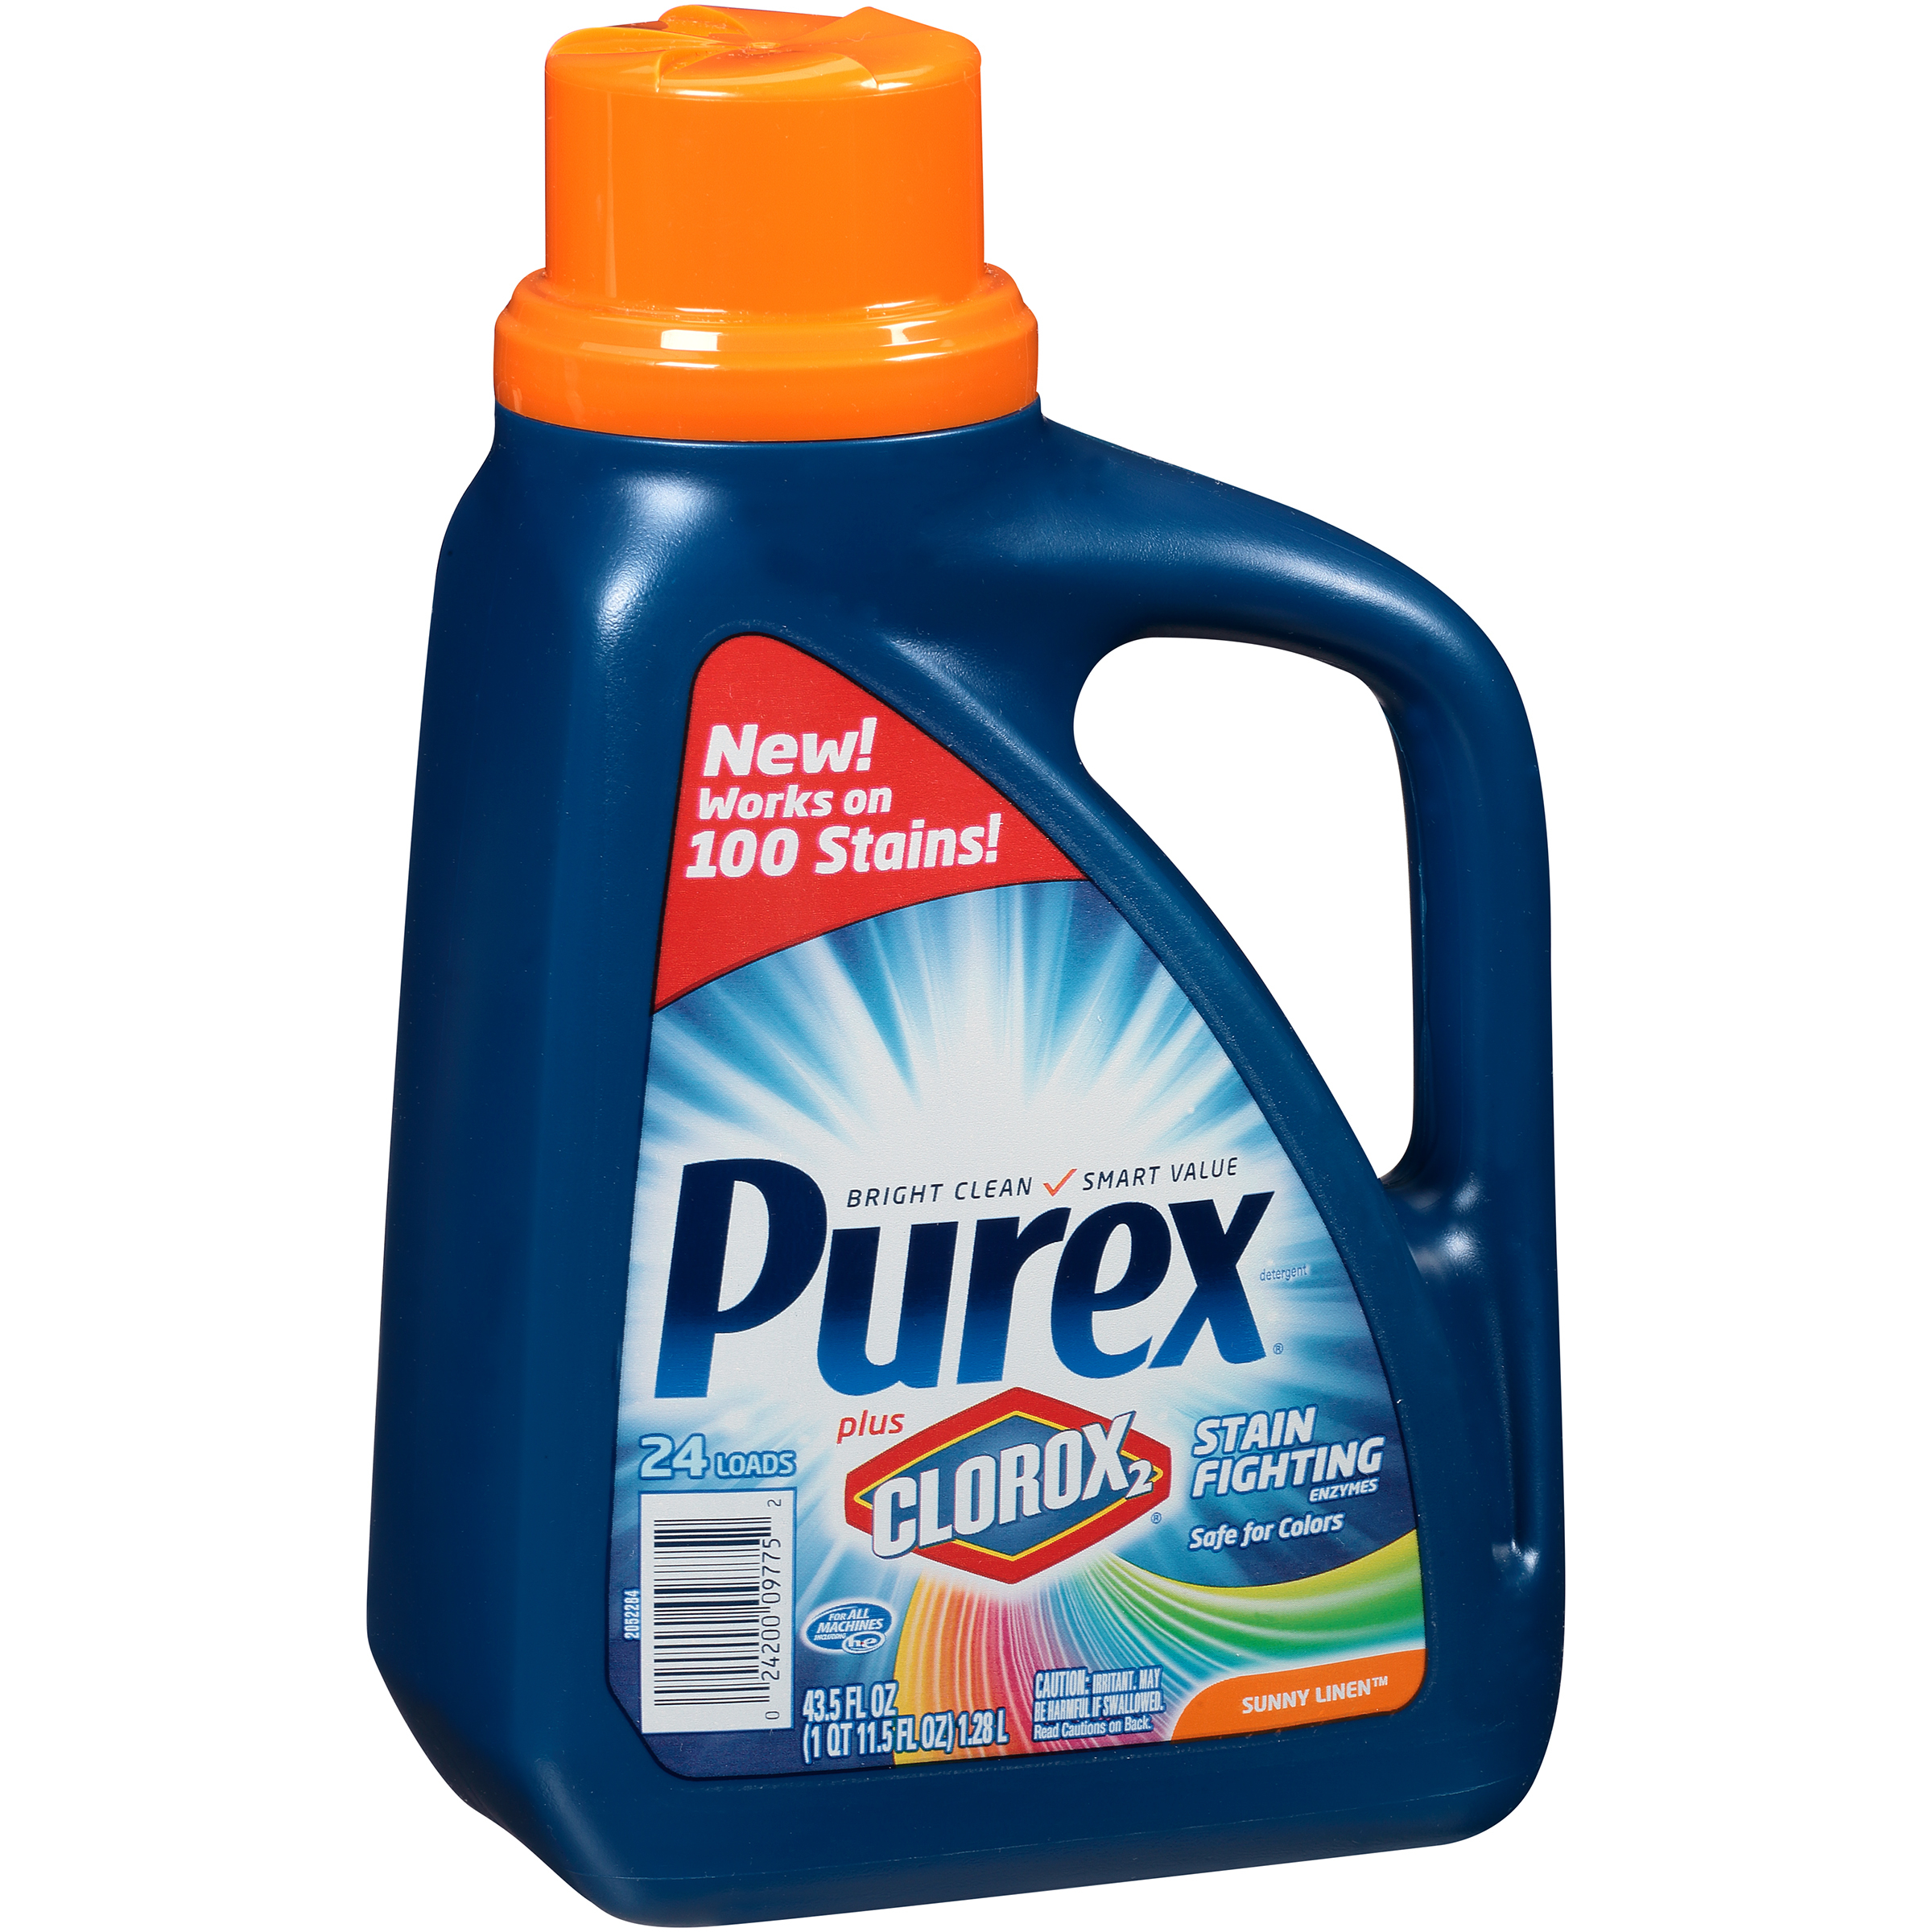 Free Purex Laundry Detergent At Price Chopper - My Momma Taught Me - Free Printable Purex Detergent Coupons